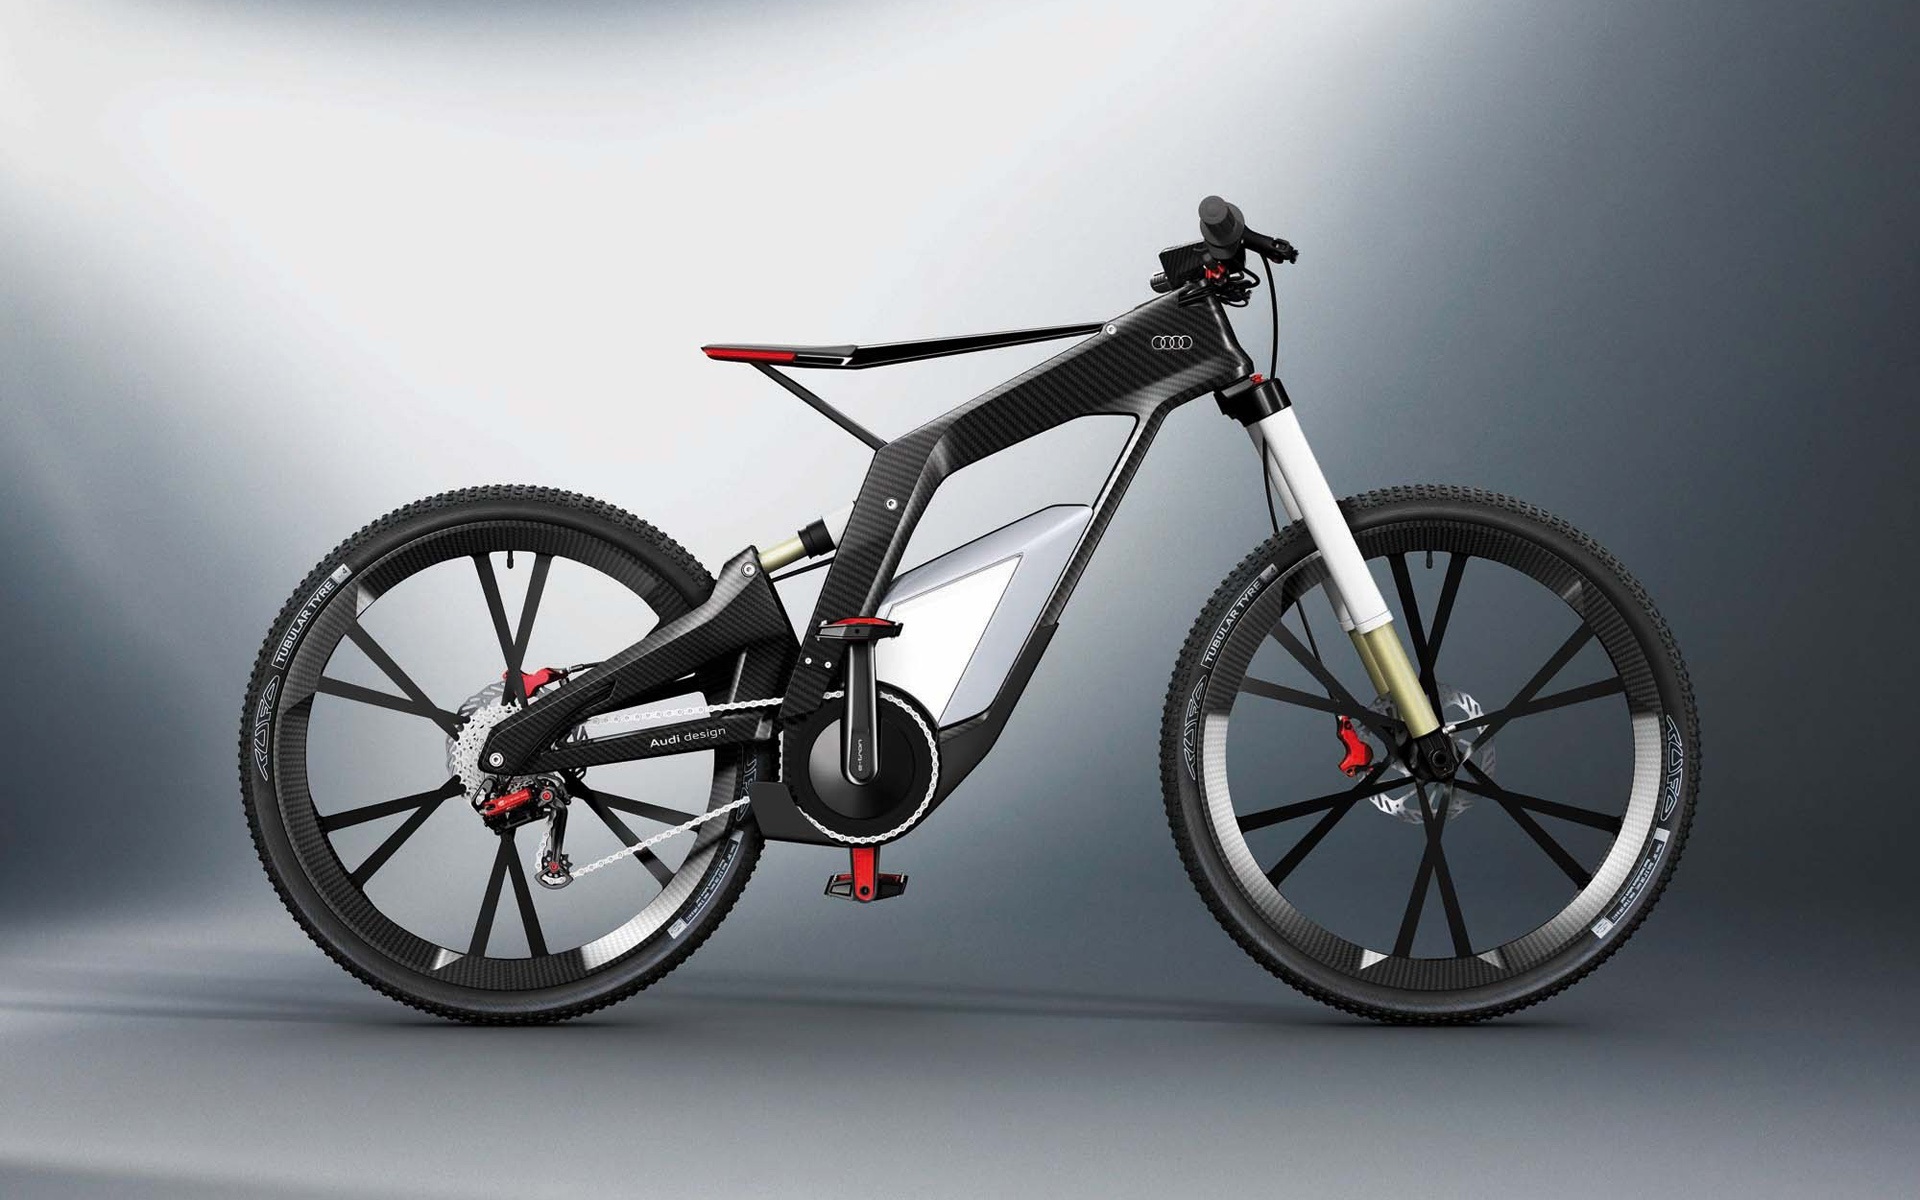 Wallpaper Audi Bicycle - Electric Cycle Price In India 2019 - HD Wallpaper 